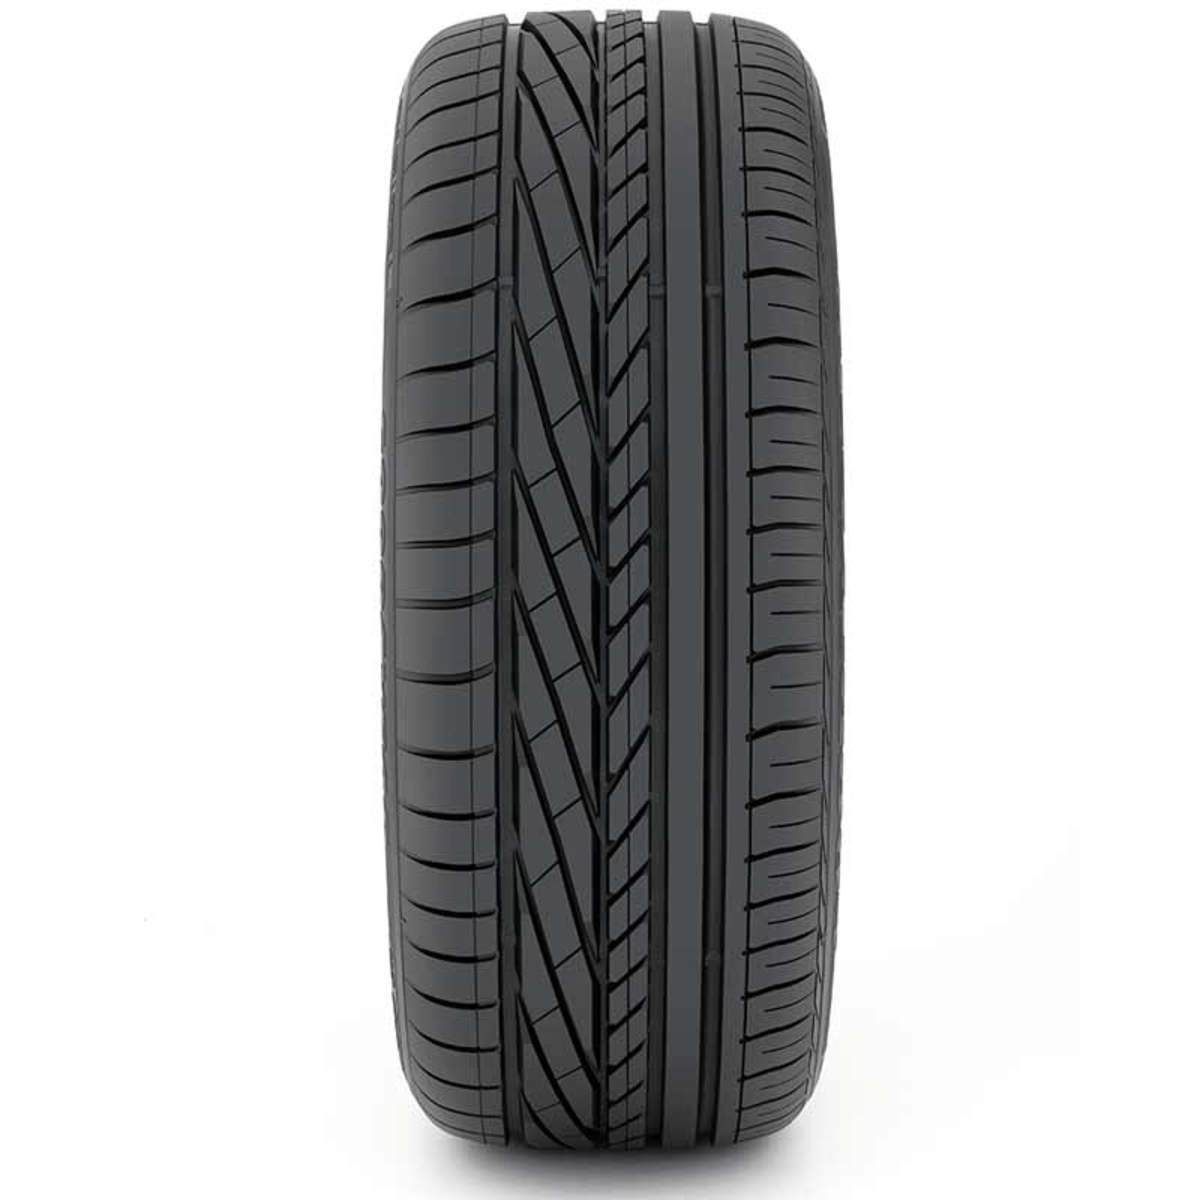 Goodyear 195/55 R16 (87) V EXCELLENCE ROF